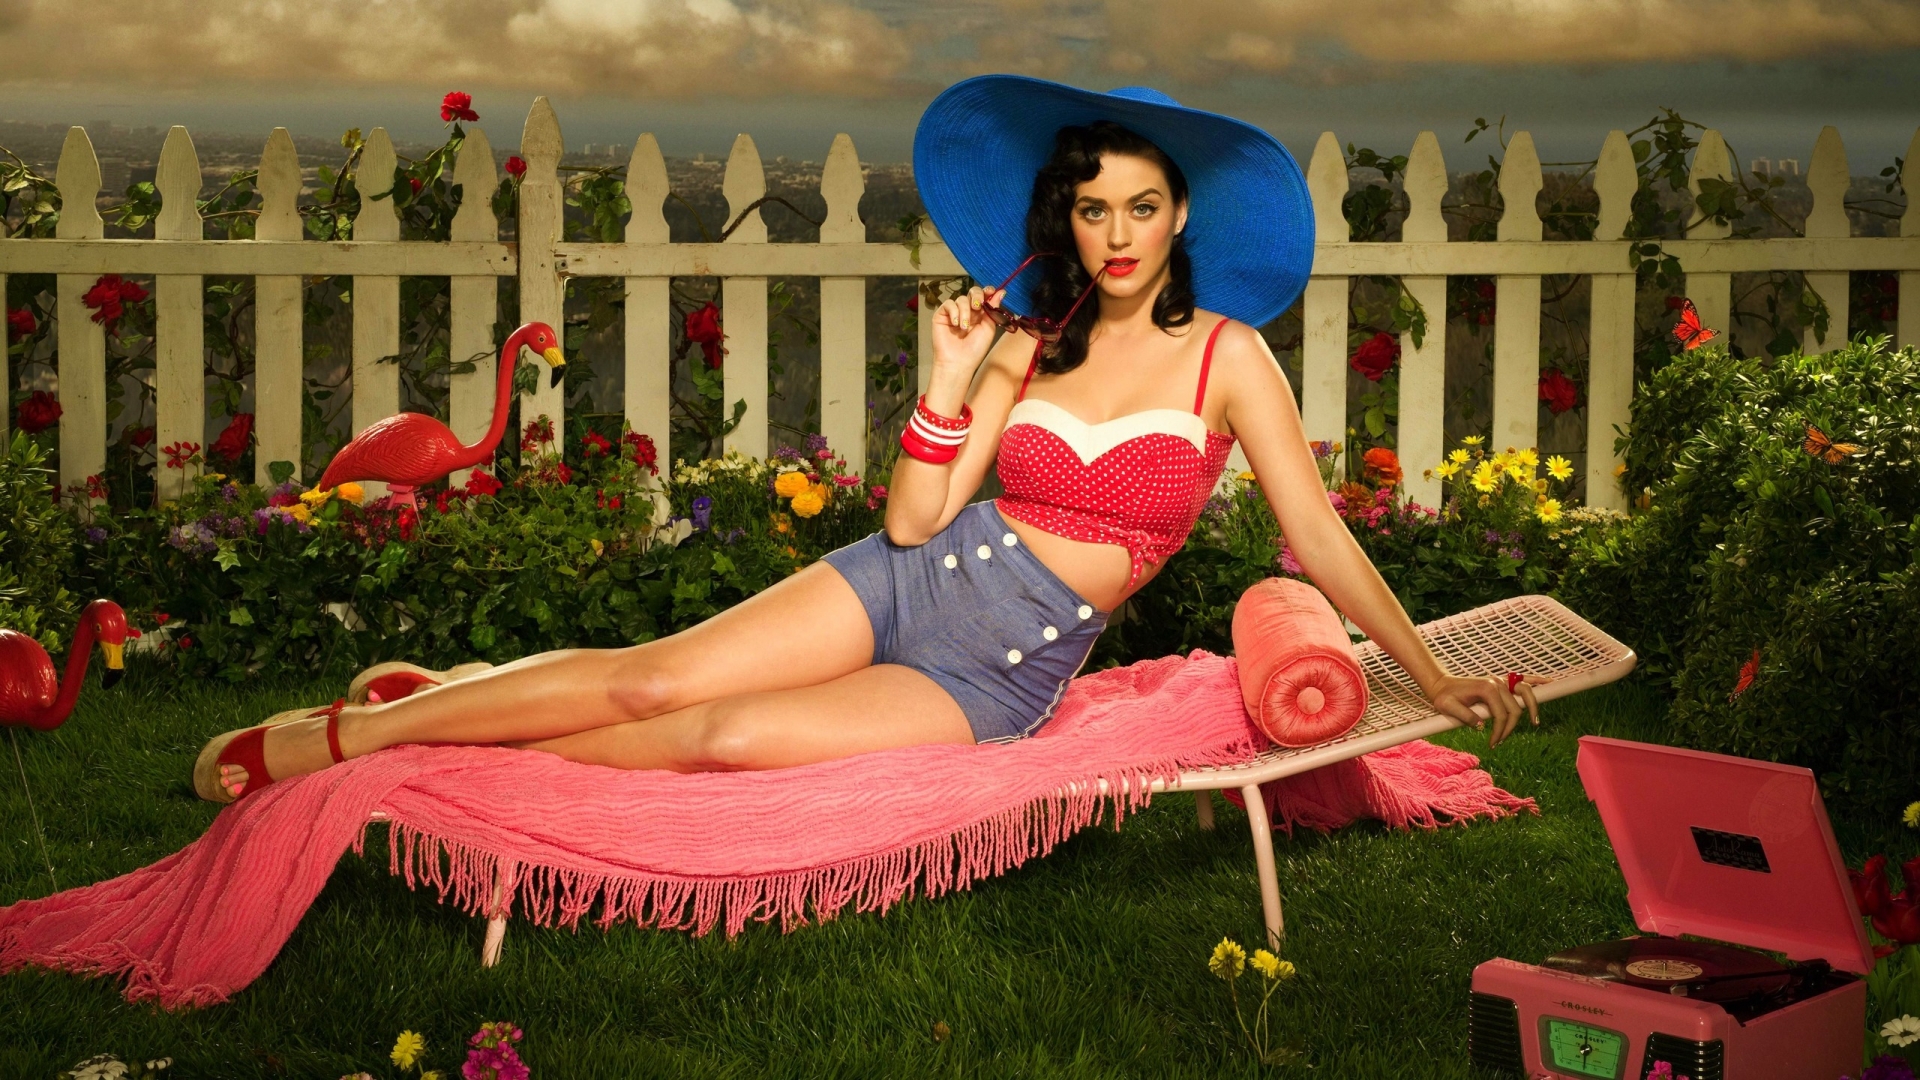 Katy Perry on The Chair for 1920 x 1080 HDTV 1080p resolution